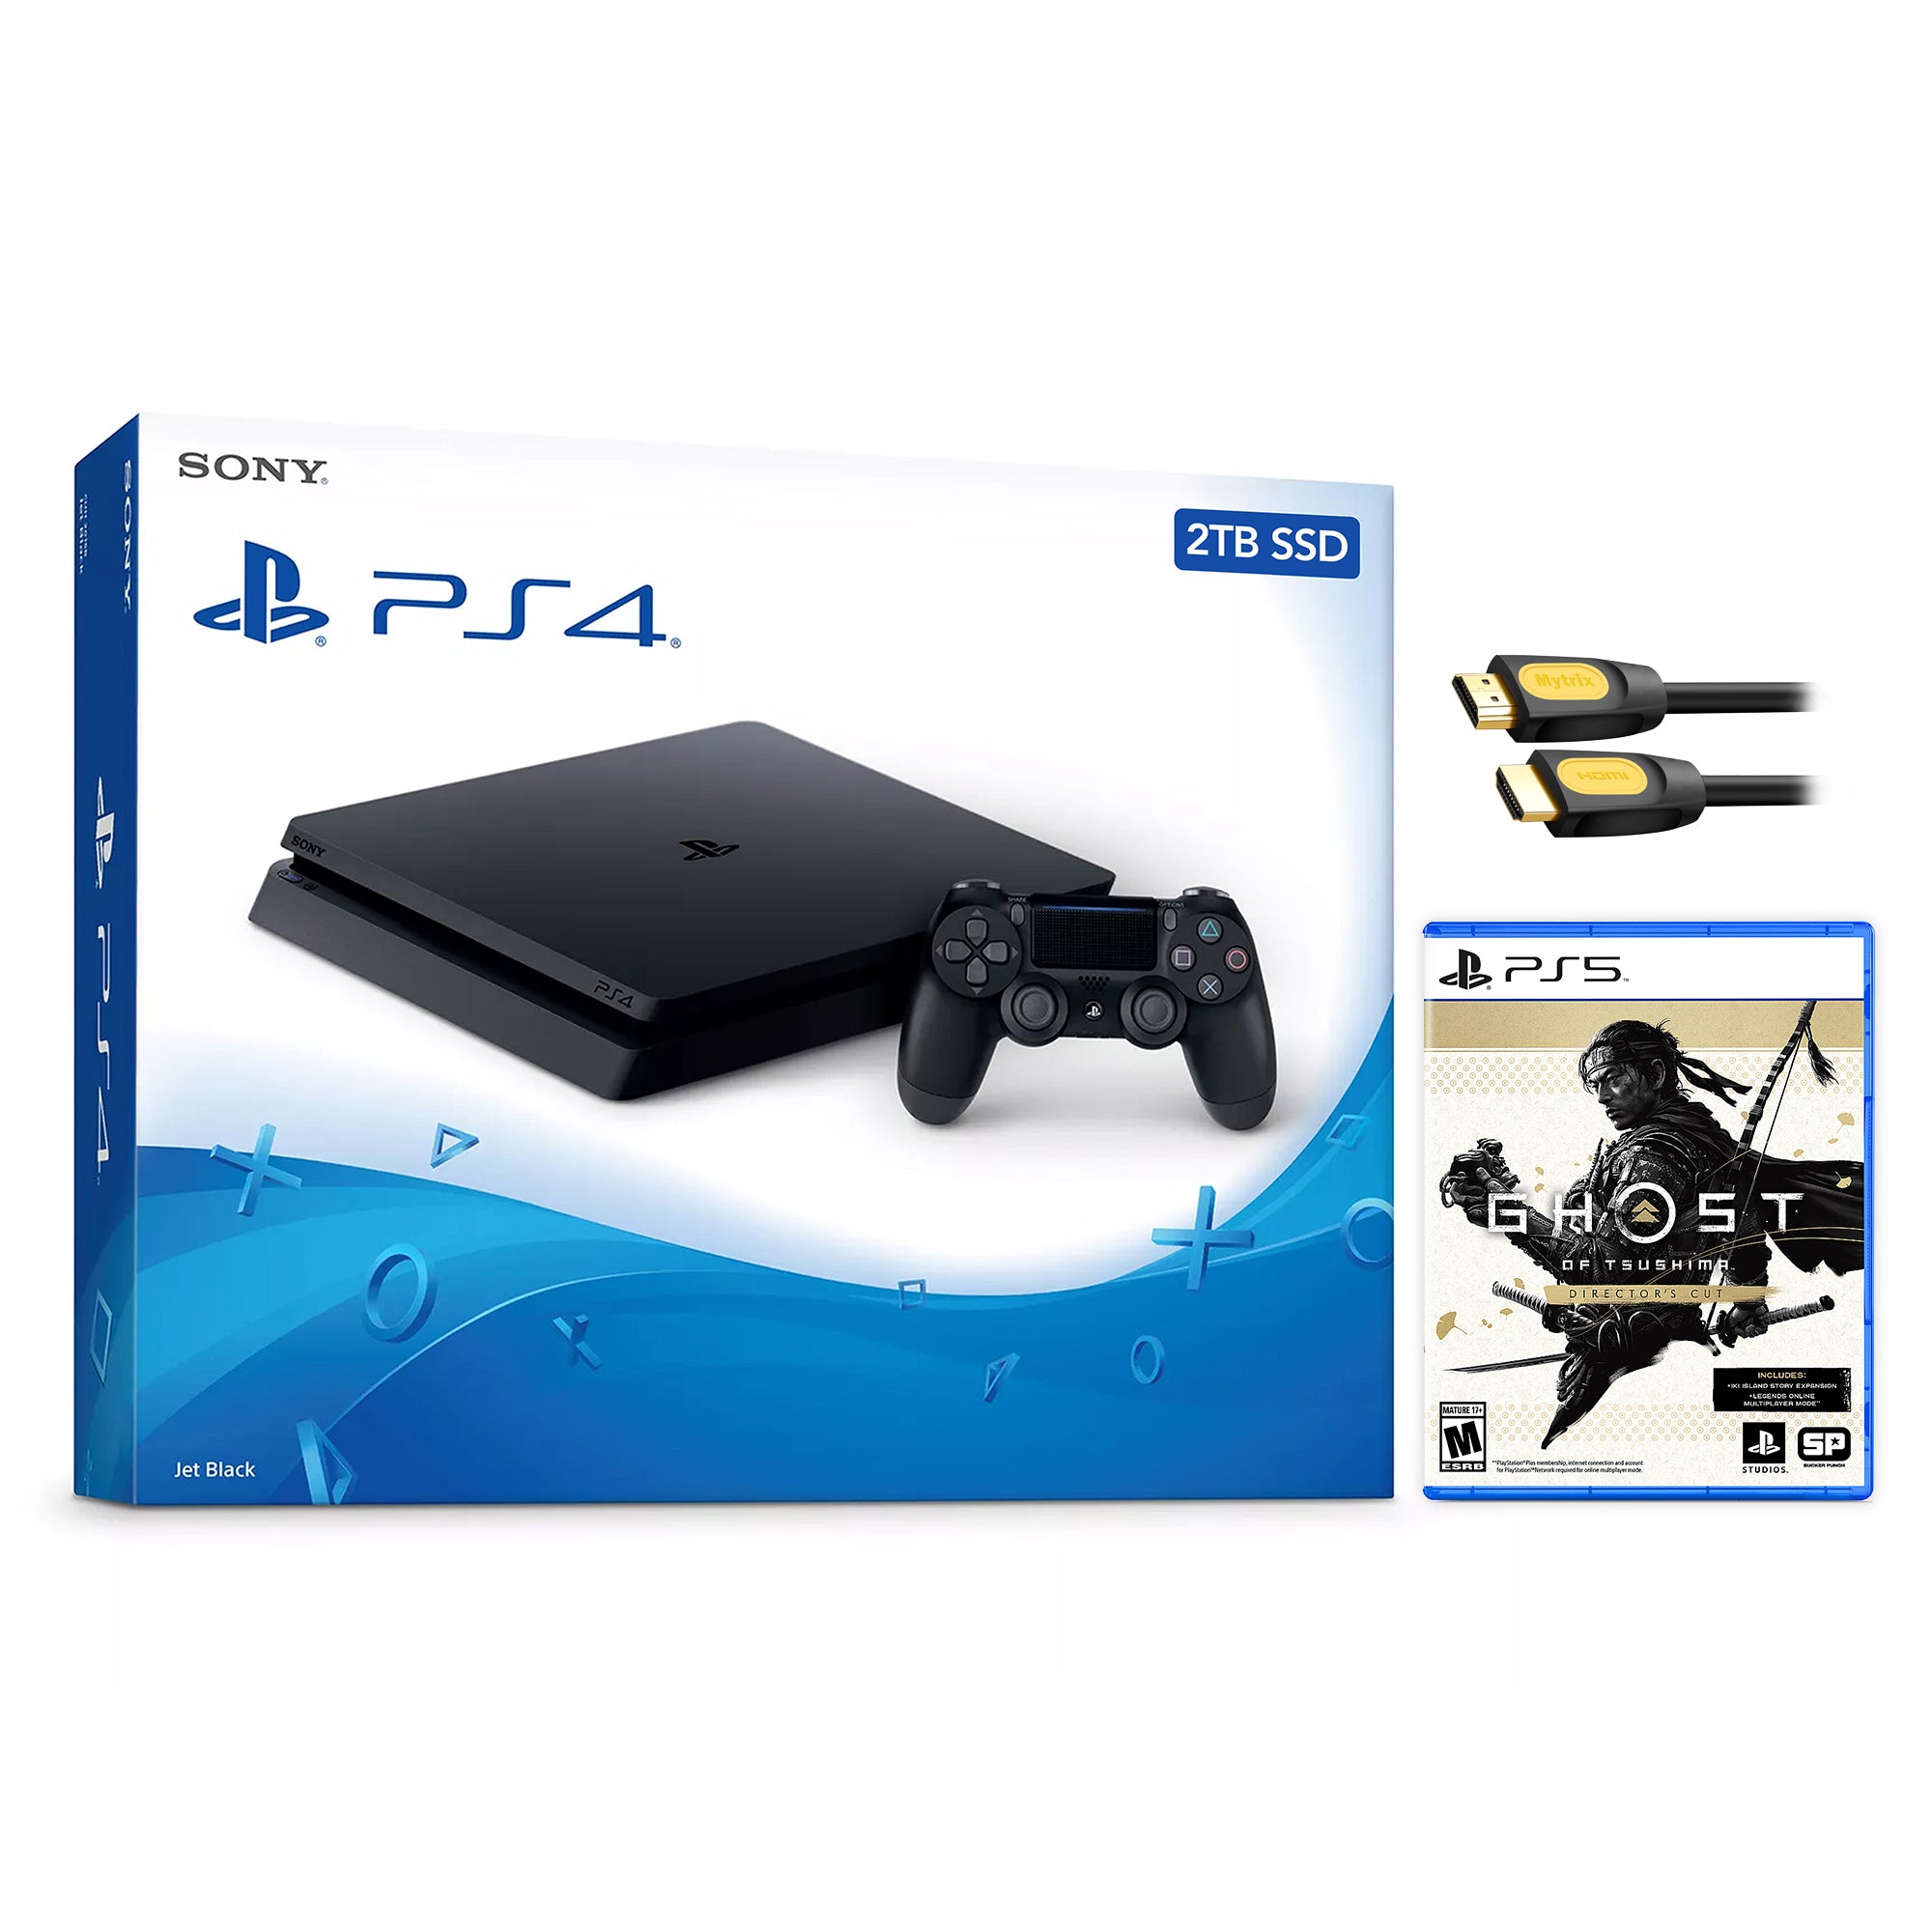 Sony PlayStation 4 Slim God of War PlayStation Hits Bundle Upgrade 2TB SSD PS4 Gaming Console, Jet Black, with Mytrix High Speed HDMI - 2TB Internal Fast Solid State Drive Enhanced PS4 Console